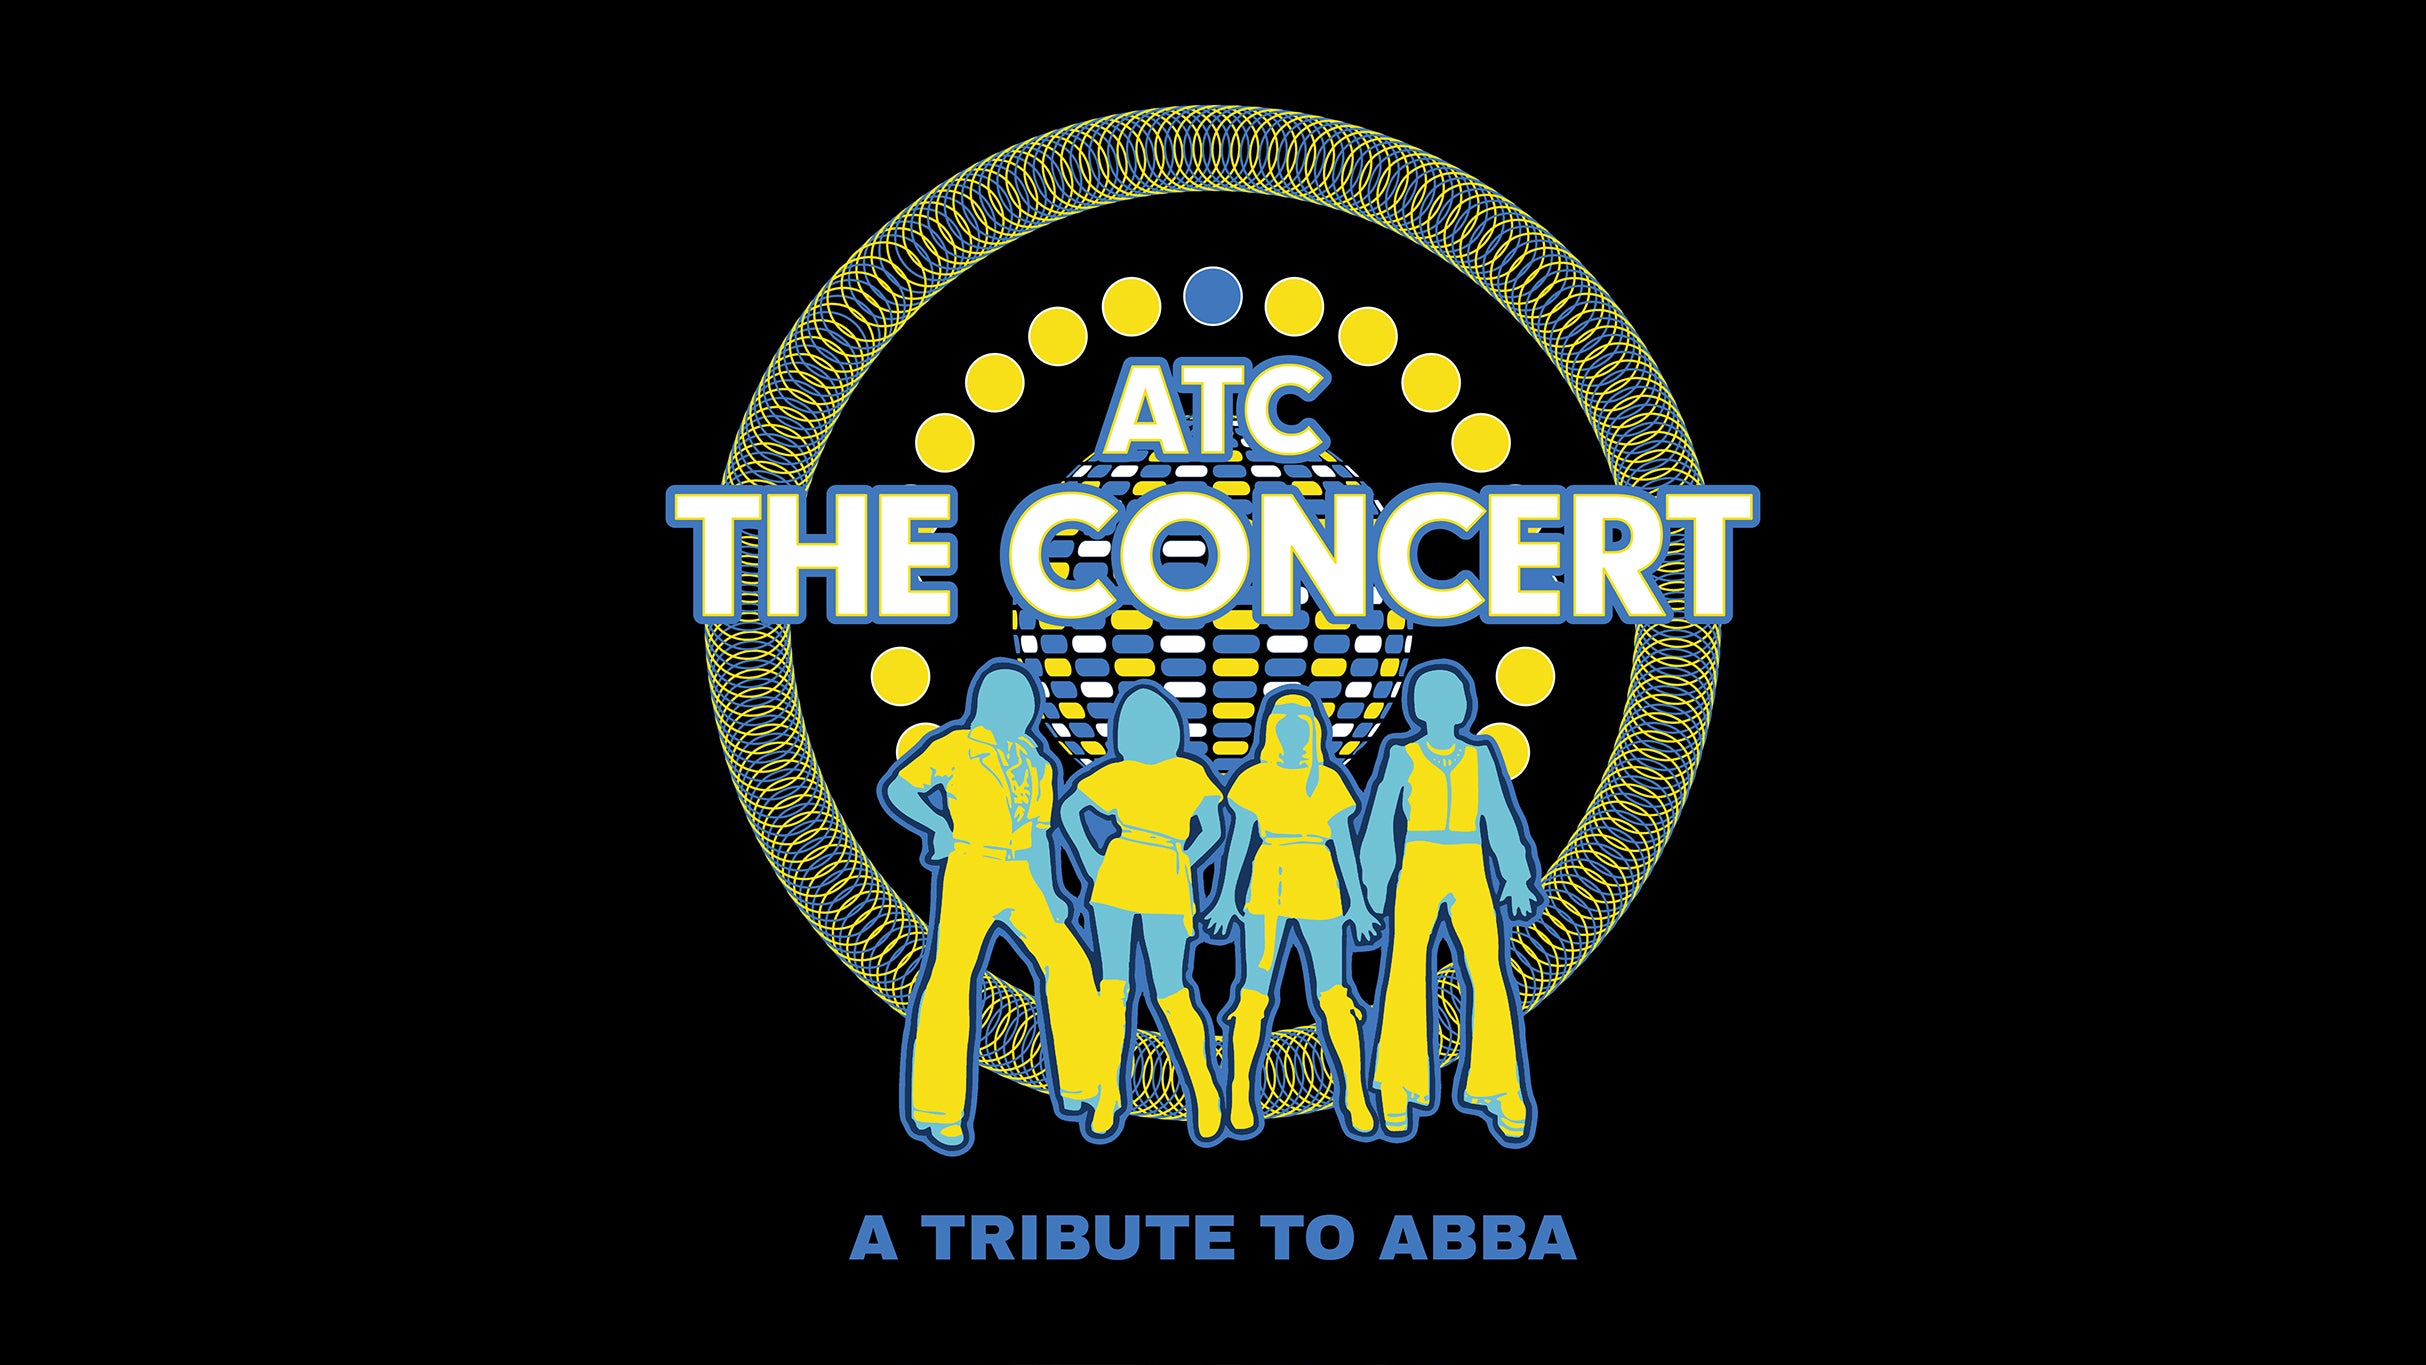 The Concert: A Tribute To ABBA at Uptown Theatre Napa